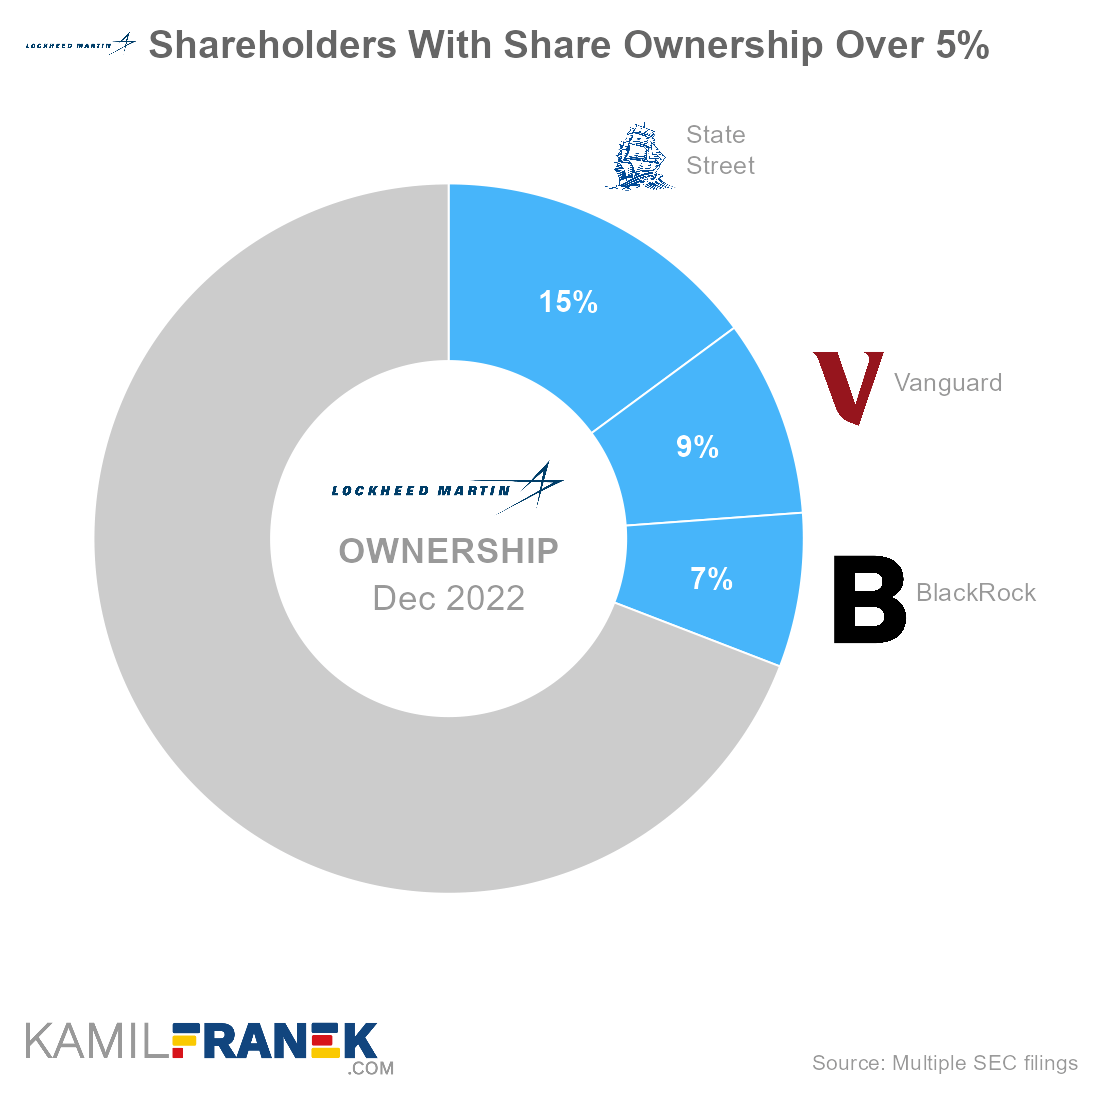 Lockheed Martin largest shareholders by share ownership and vote control (donut chart)